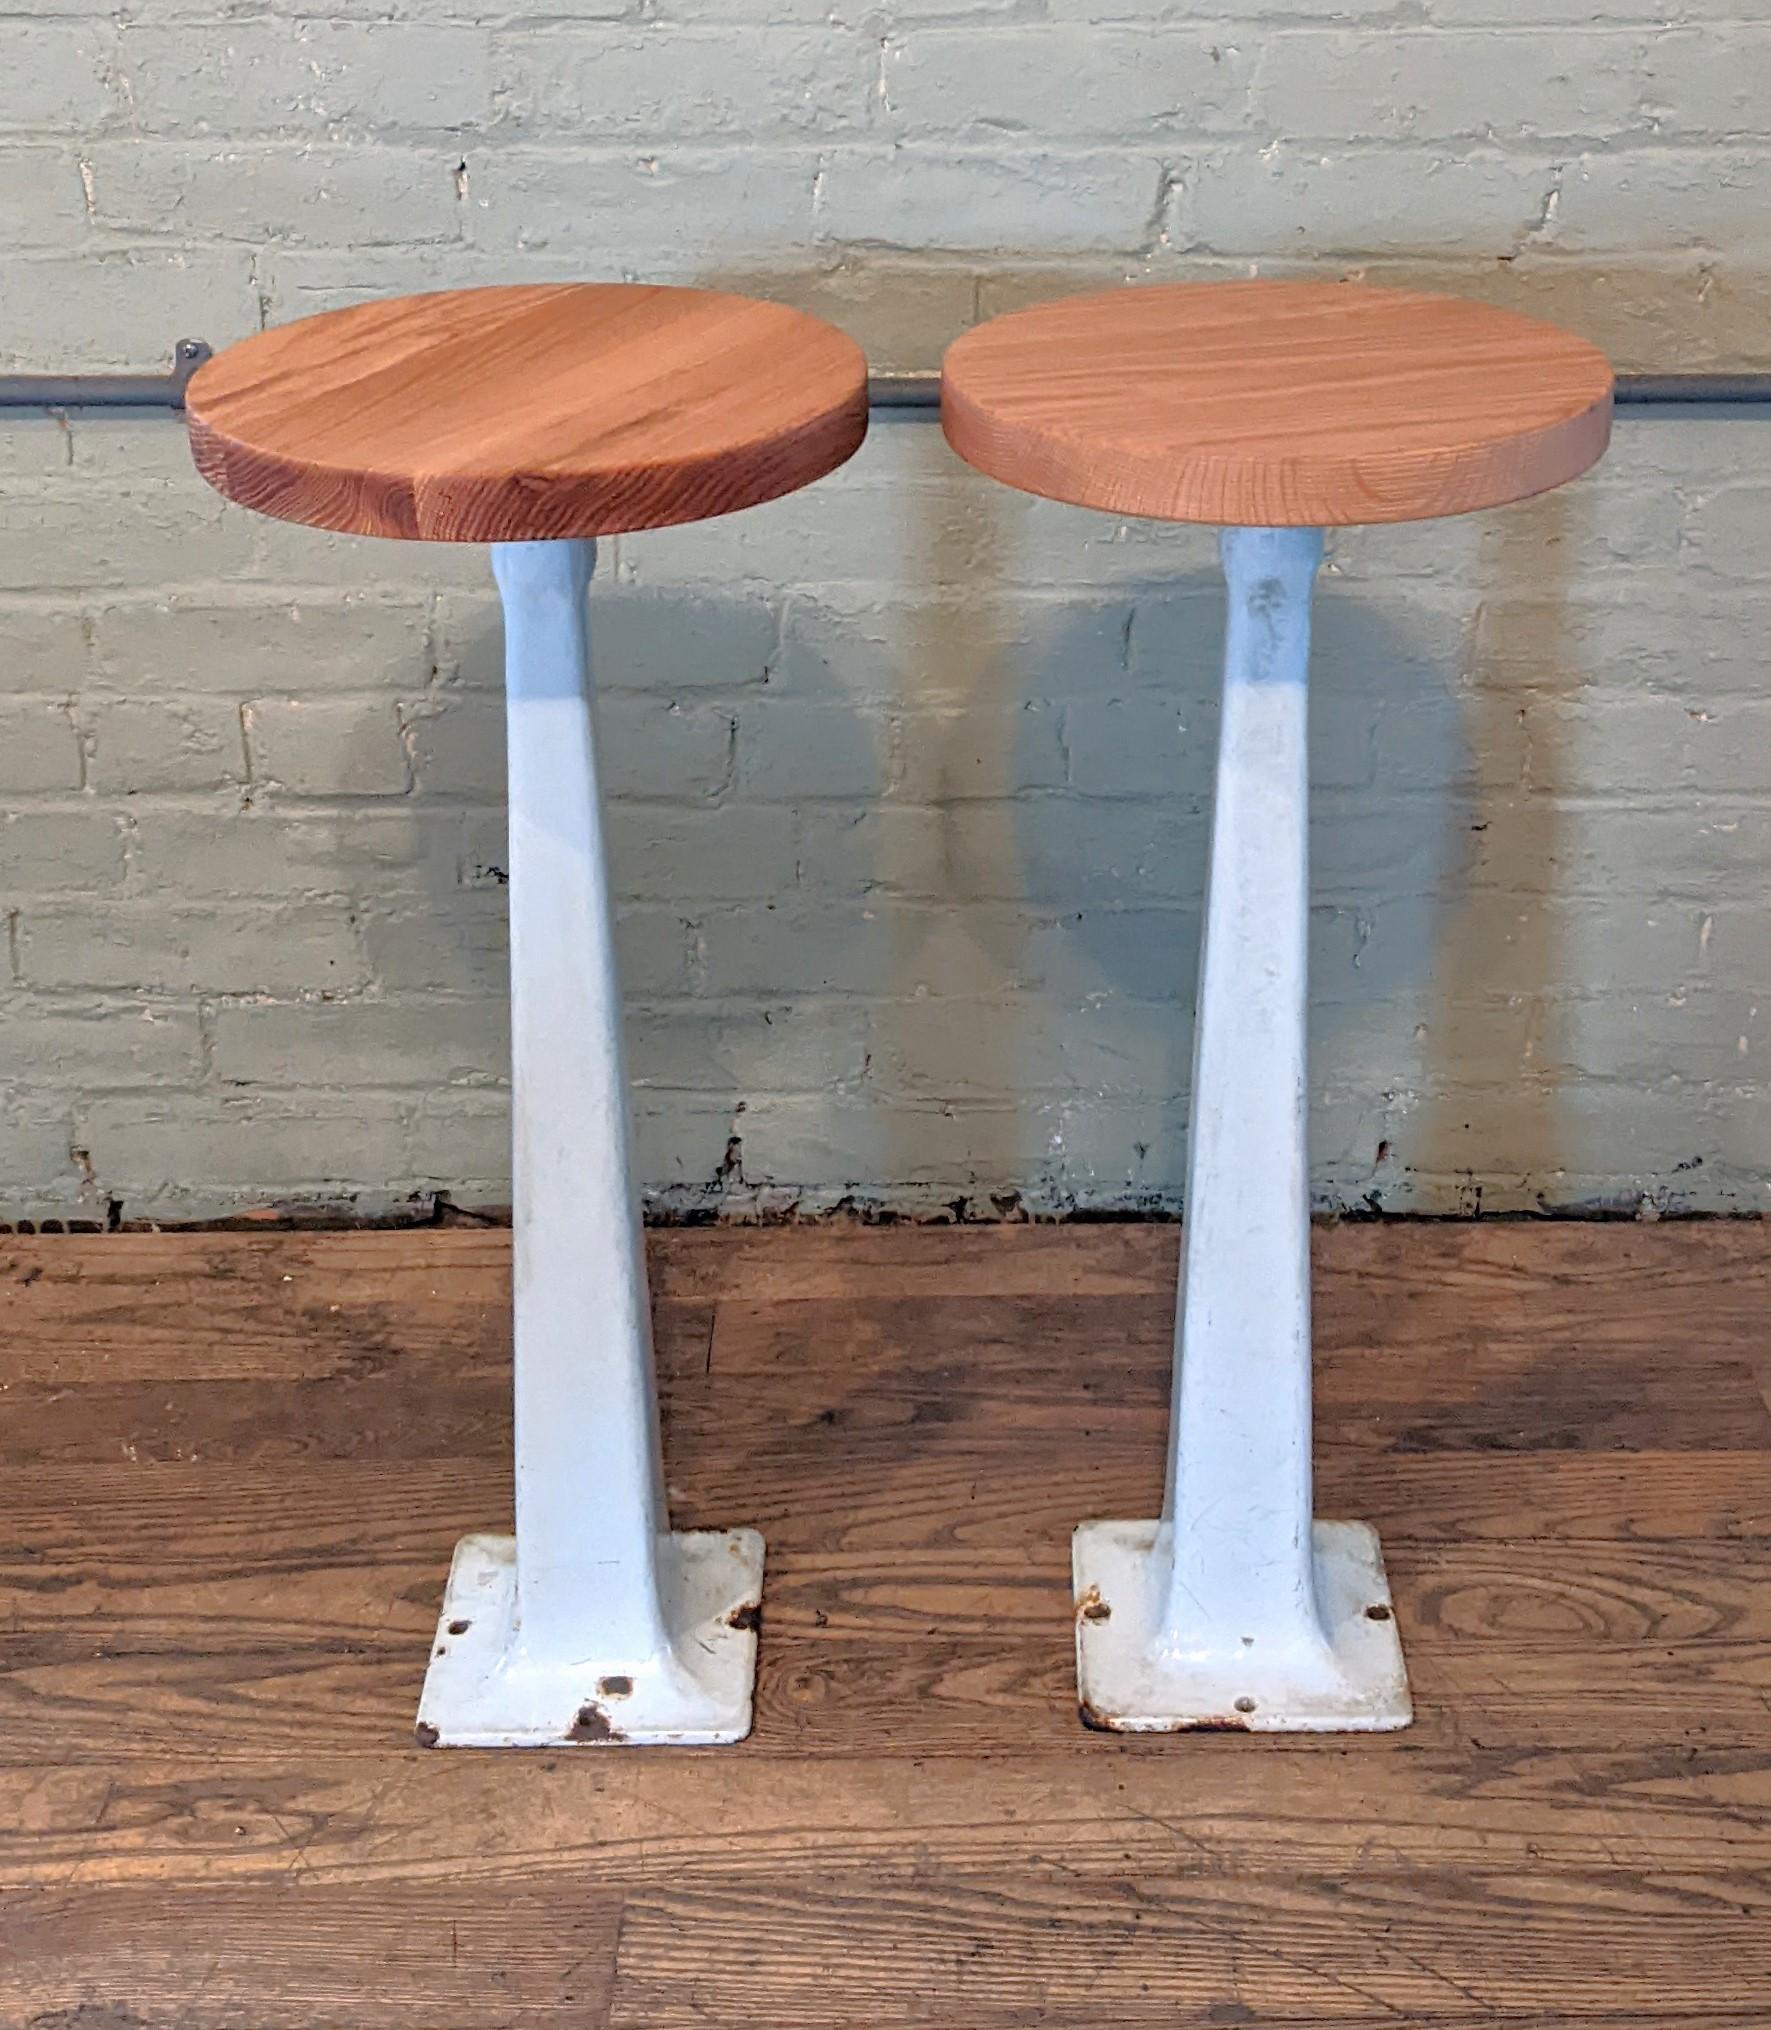 White diner stools with oak seats.

Seat height: 28